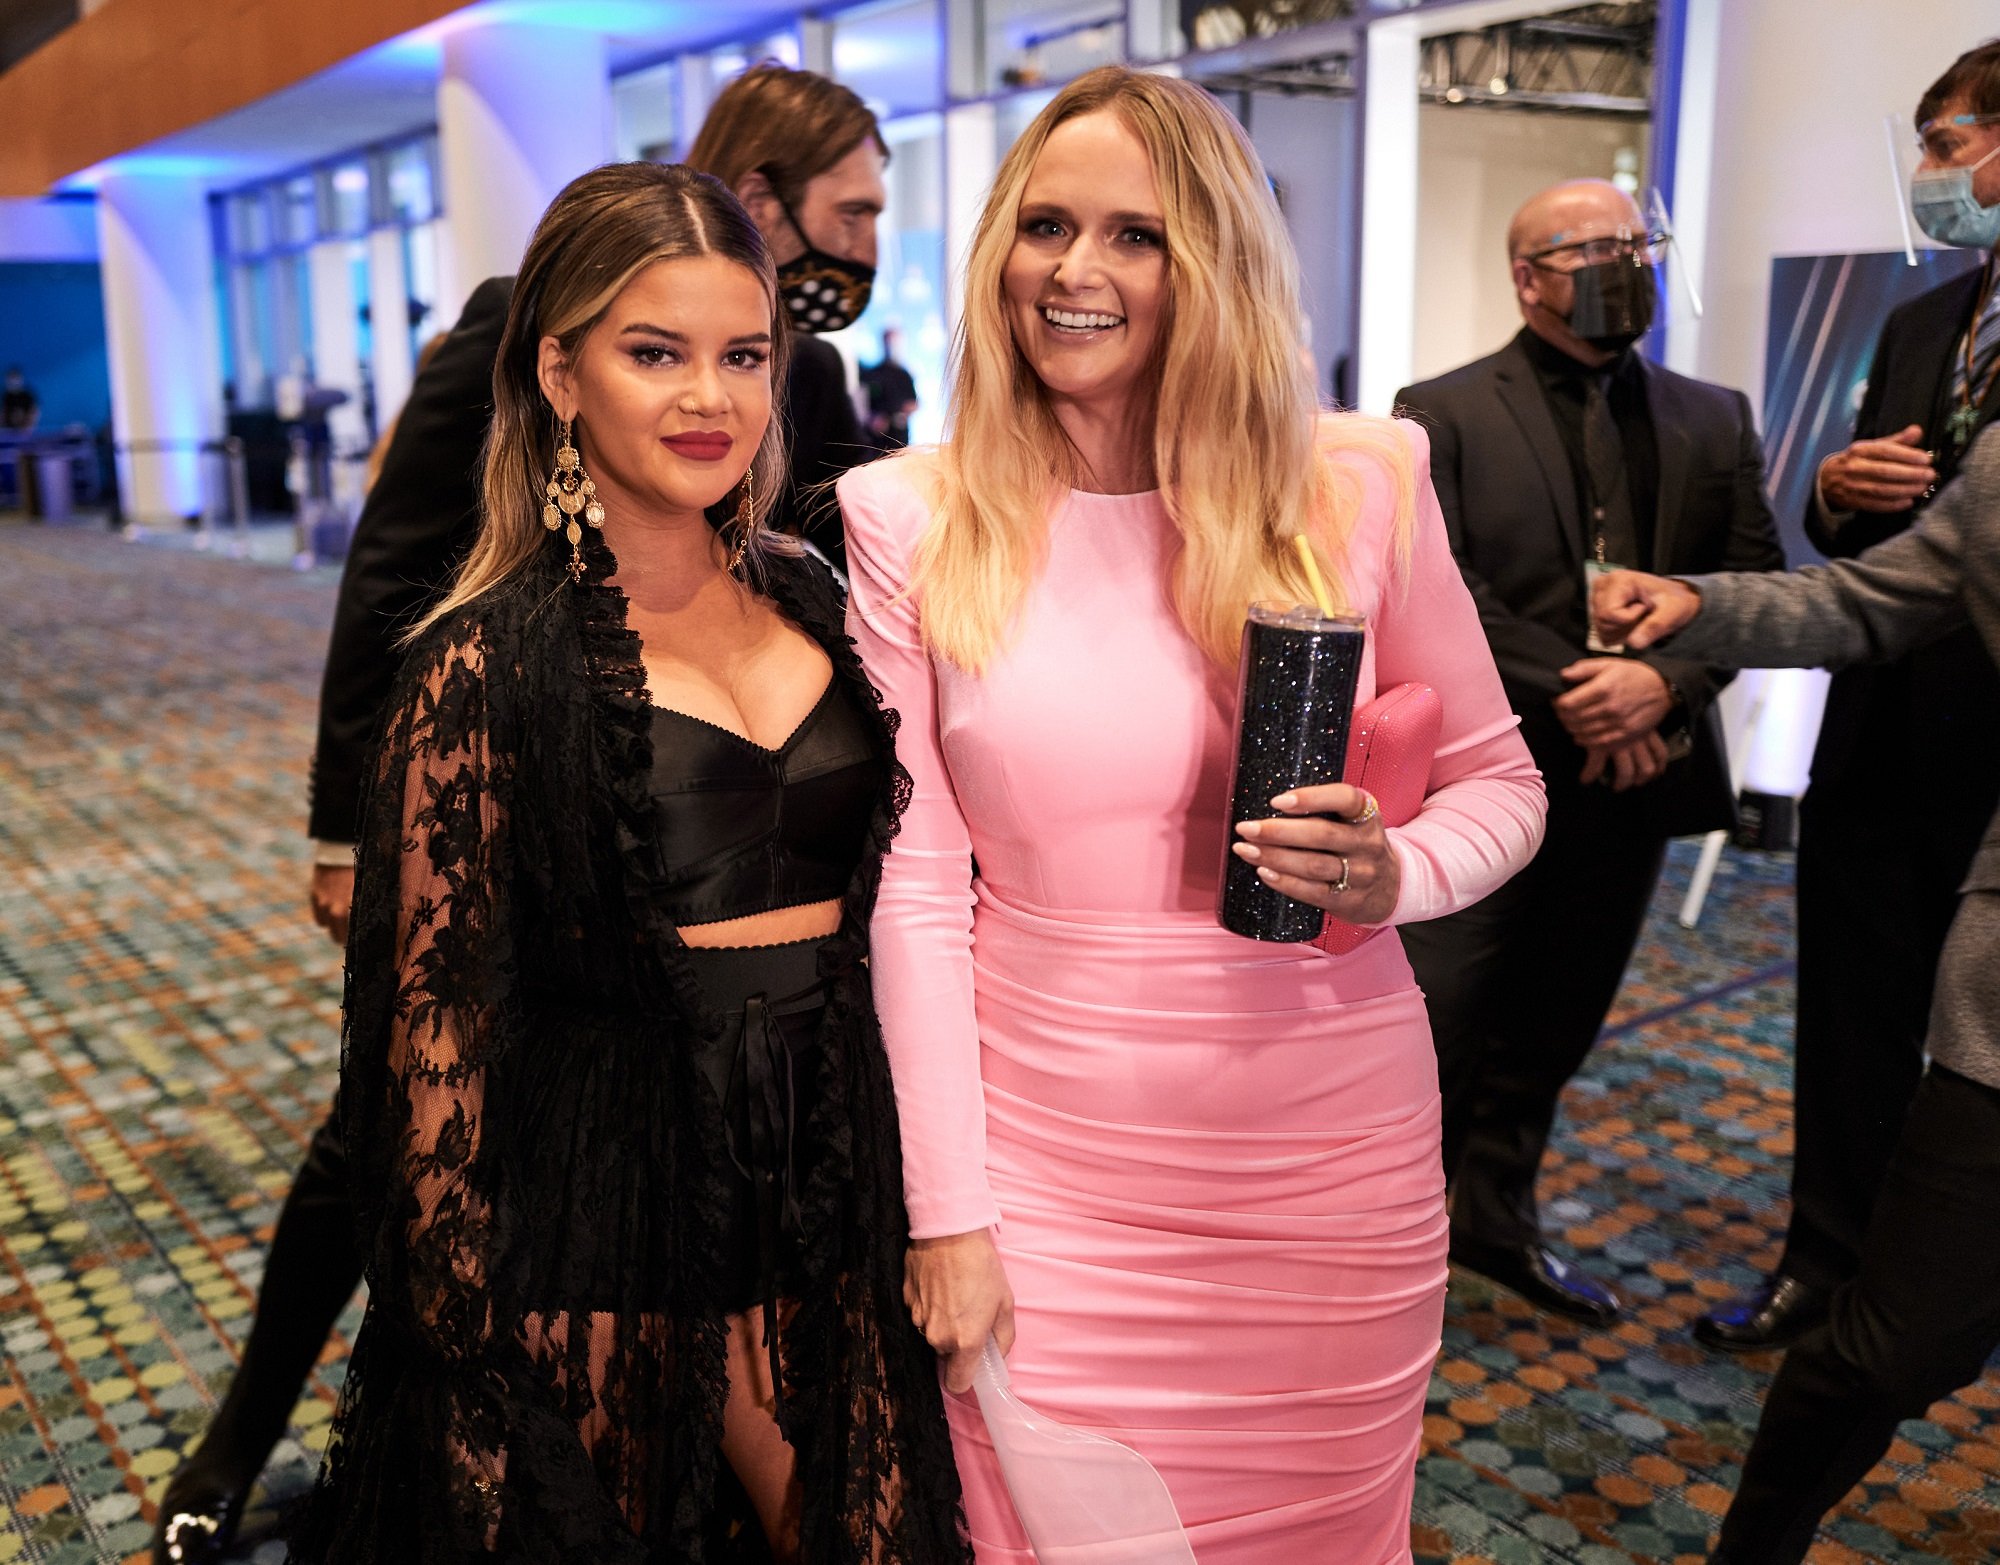 Maren Morris and Miranda Lambert stand side-by-side and smile at the camera